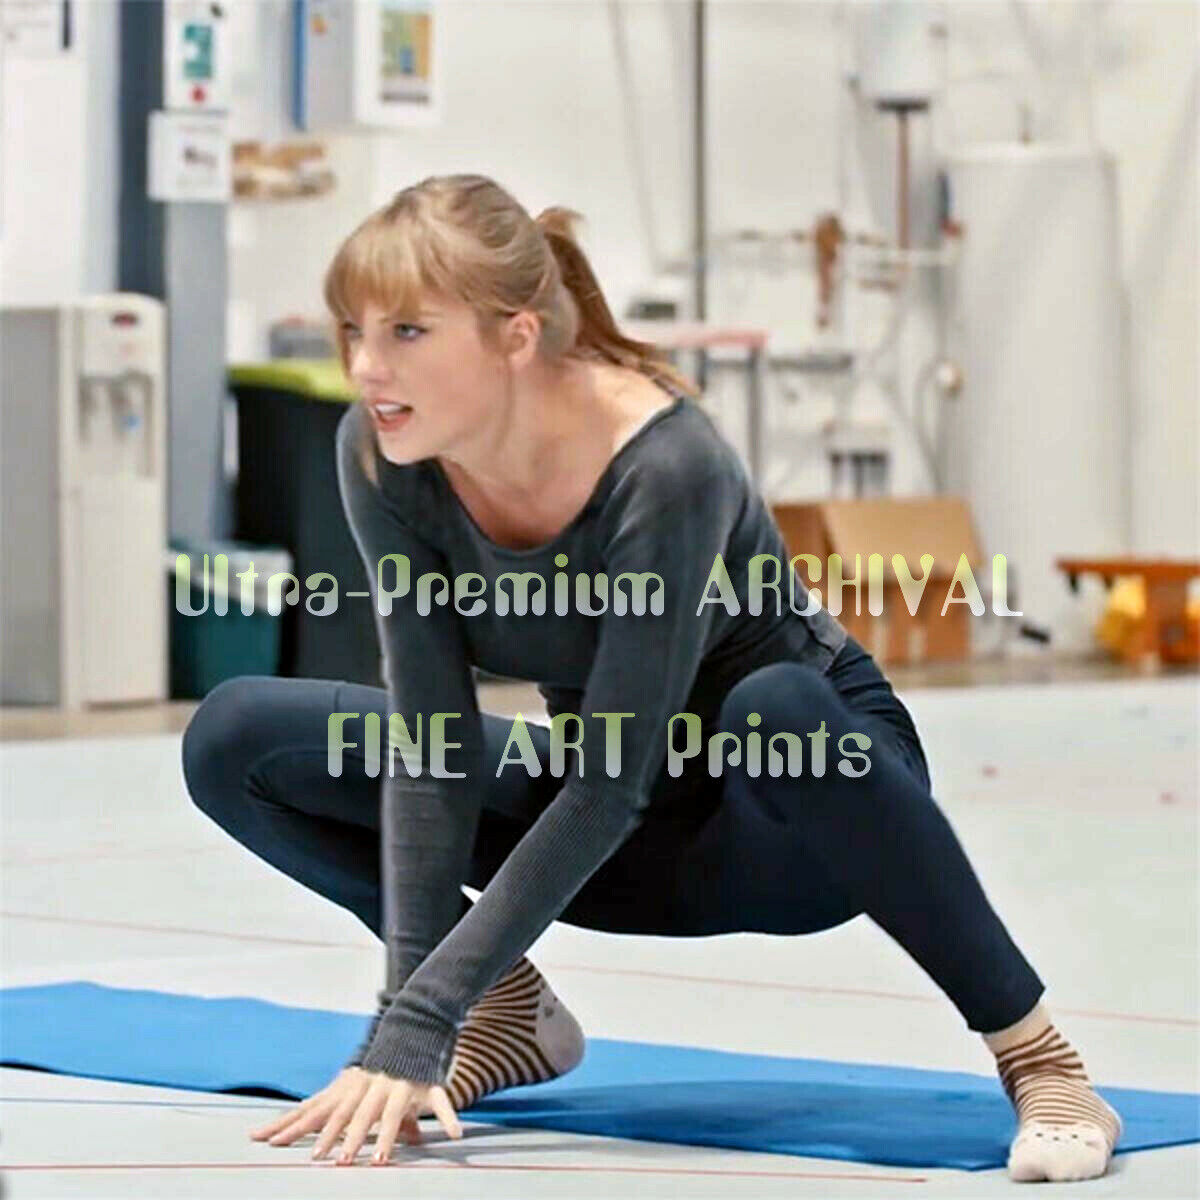 Taylor Swift Squats For "cats" Movie ** Hi-res Fine Art Archival Photo (8.5x11)